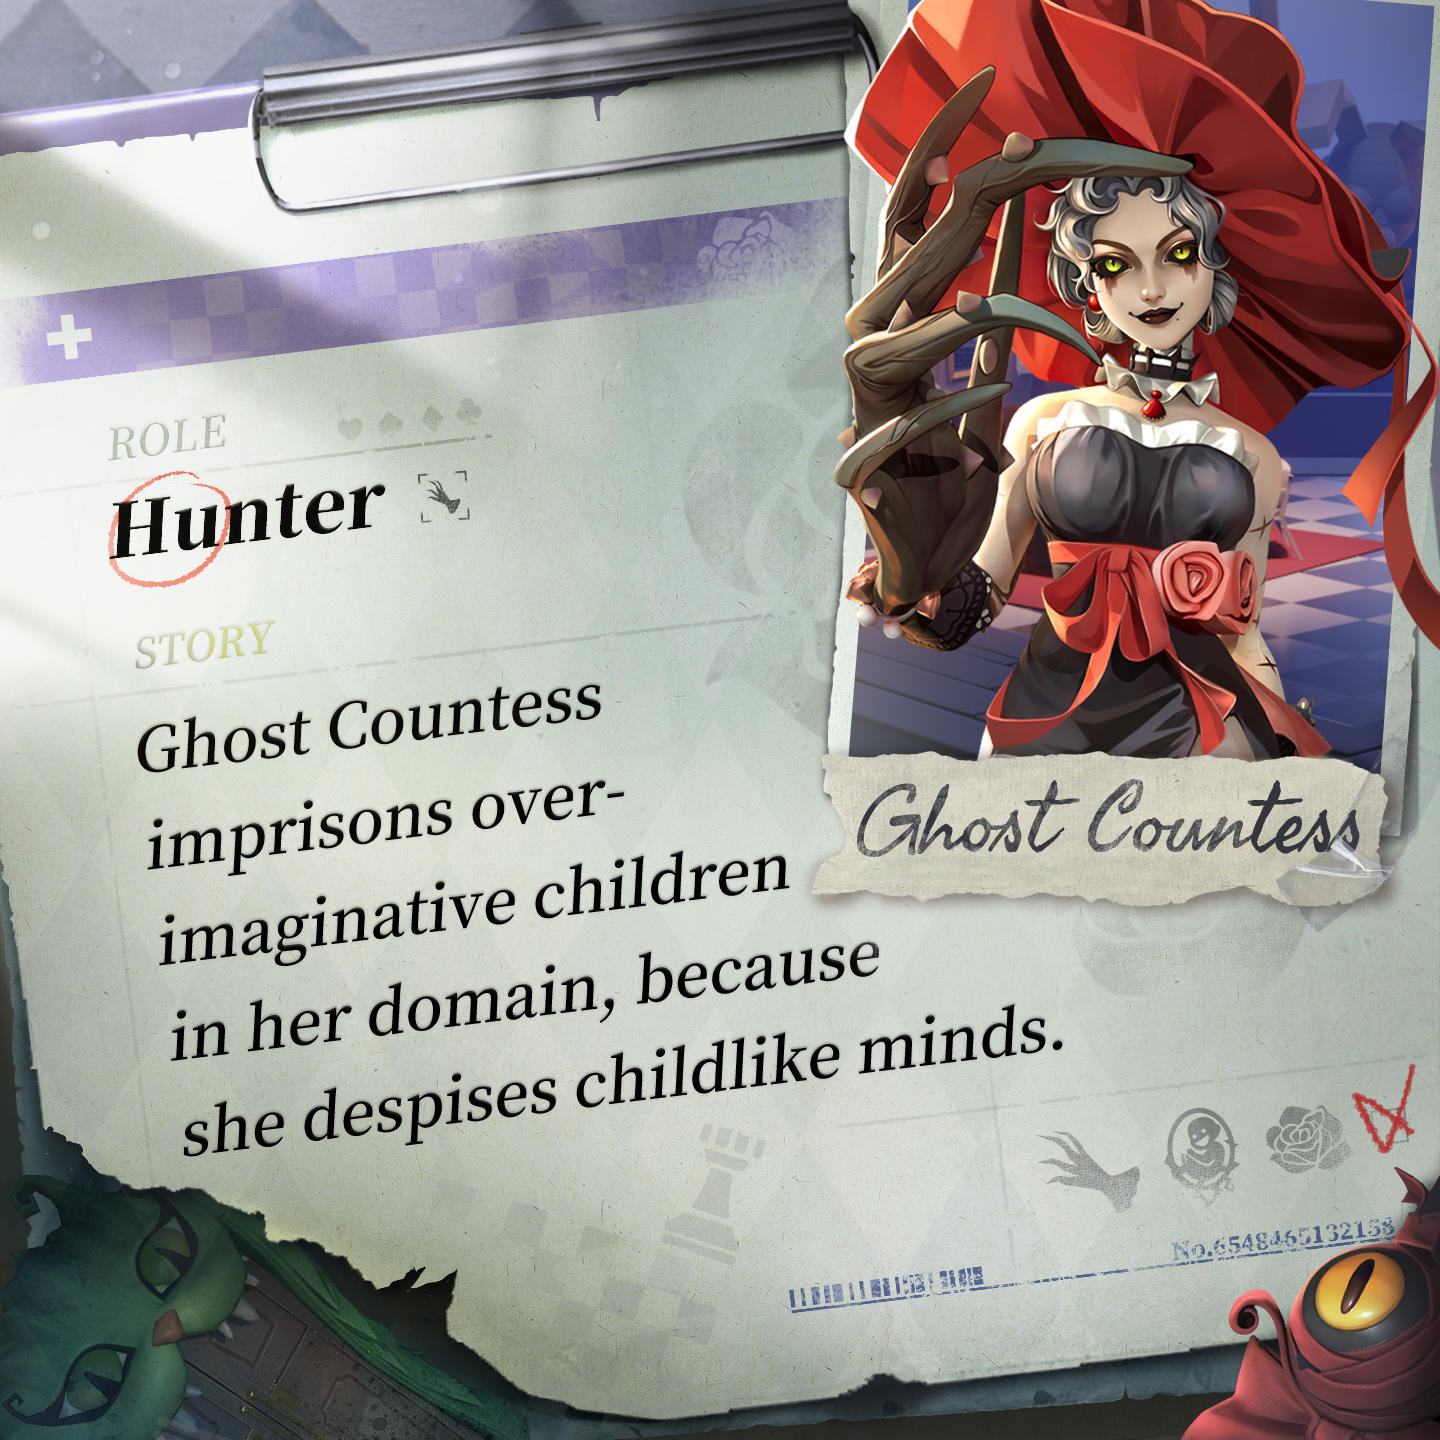 Ghost Countess loathed childlike minds